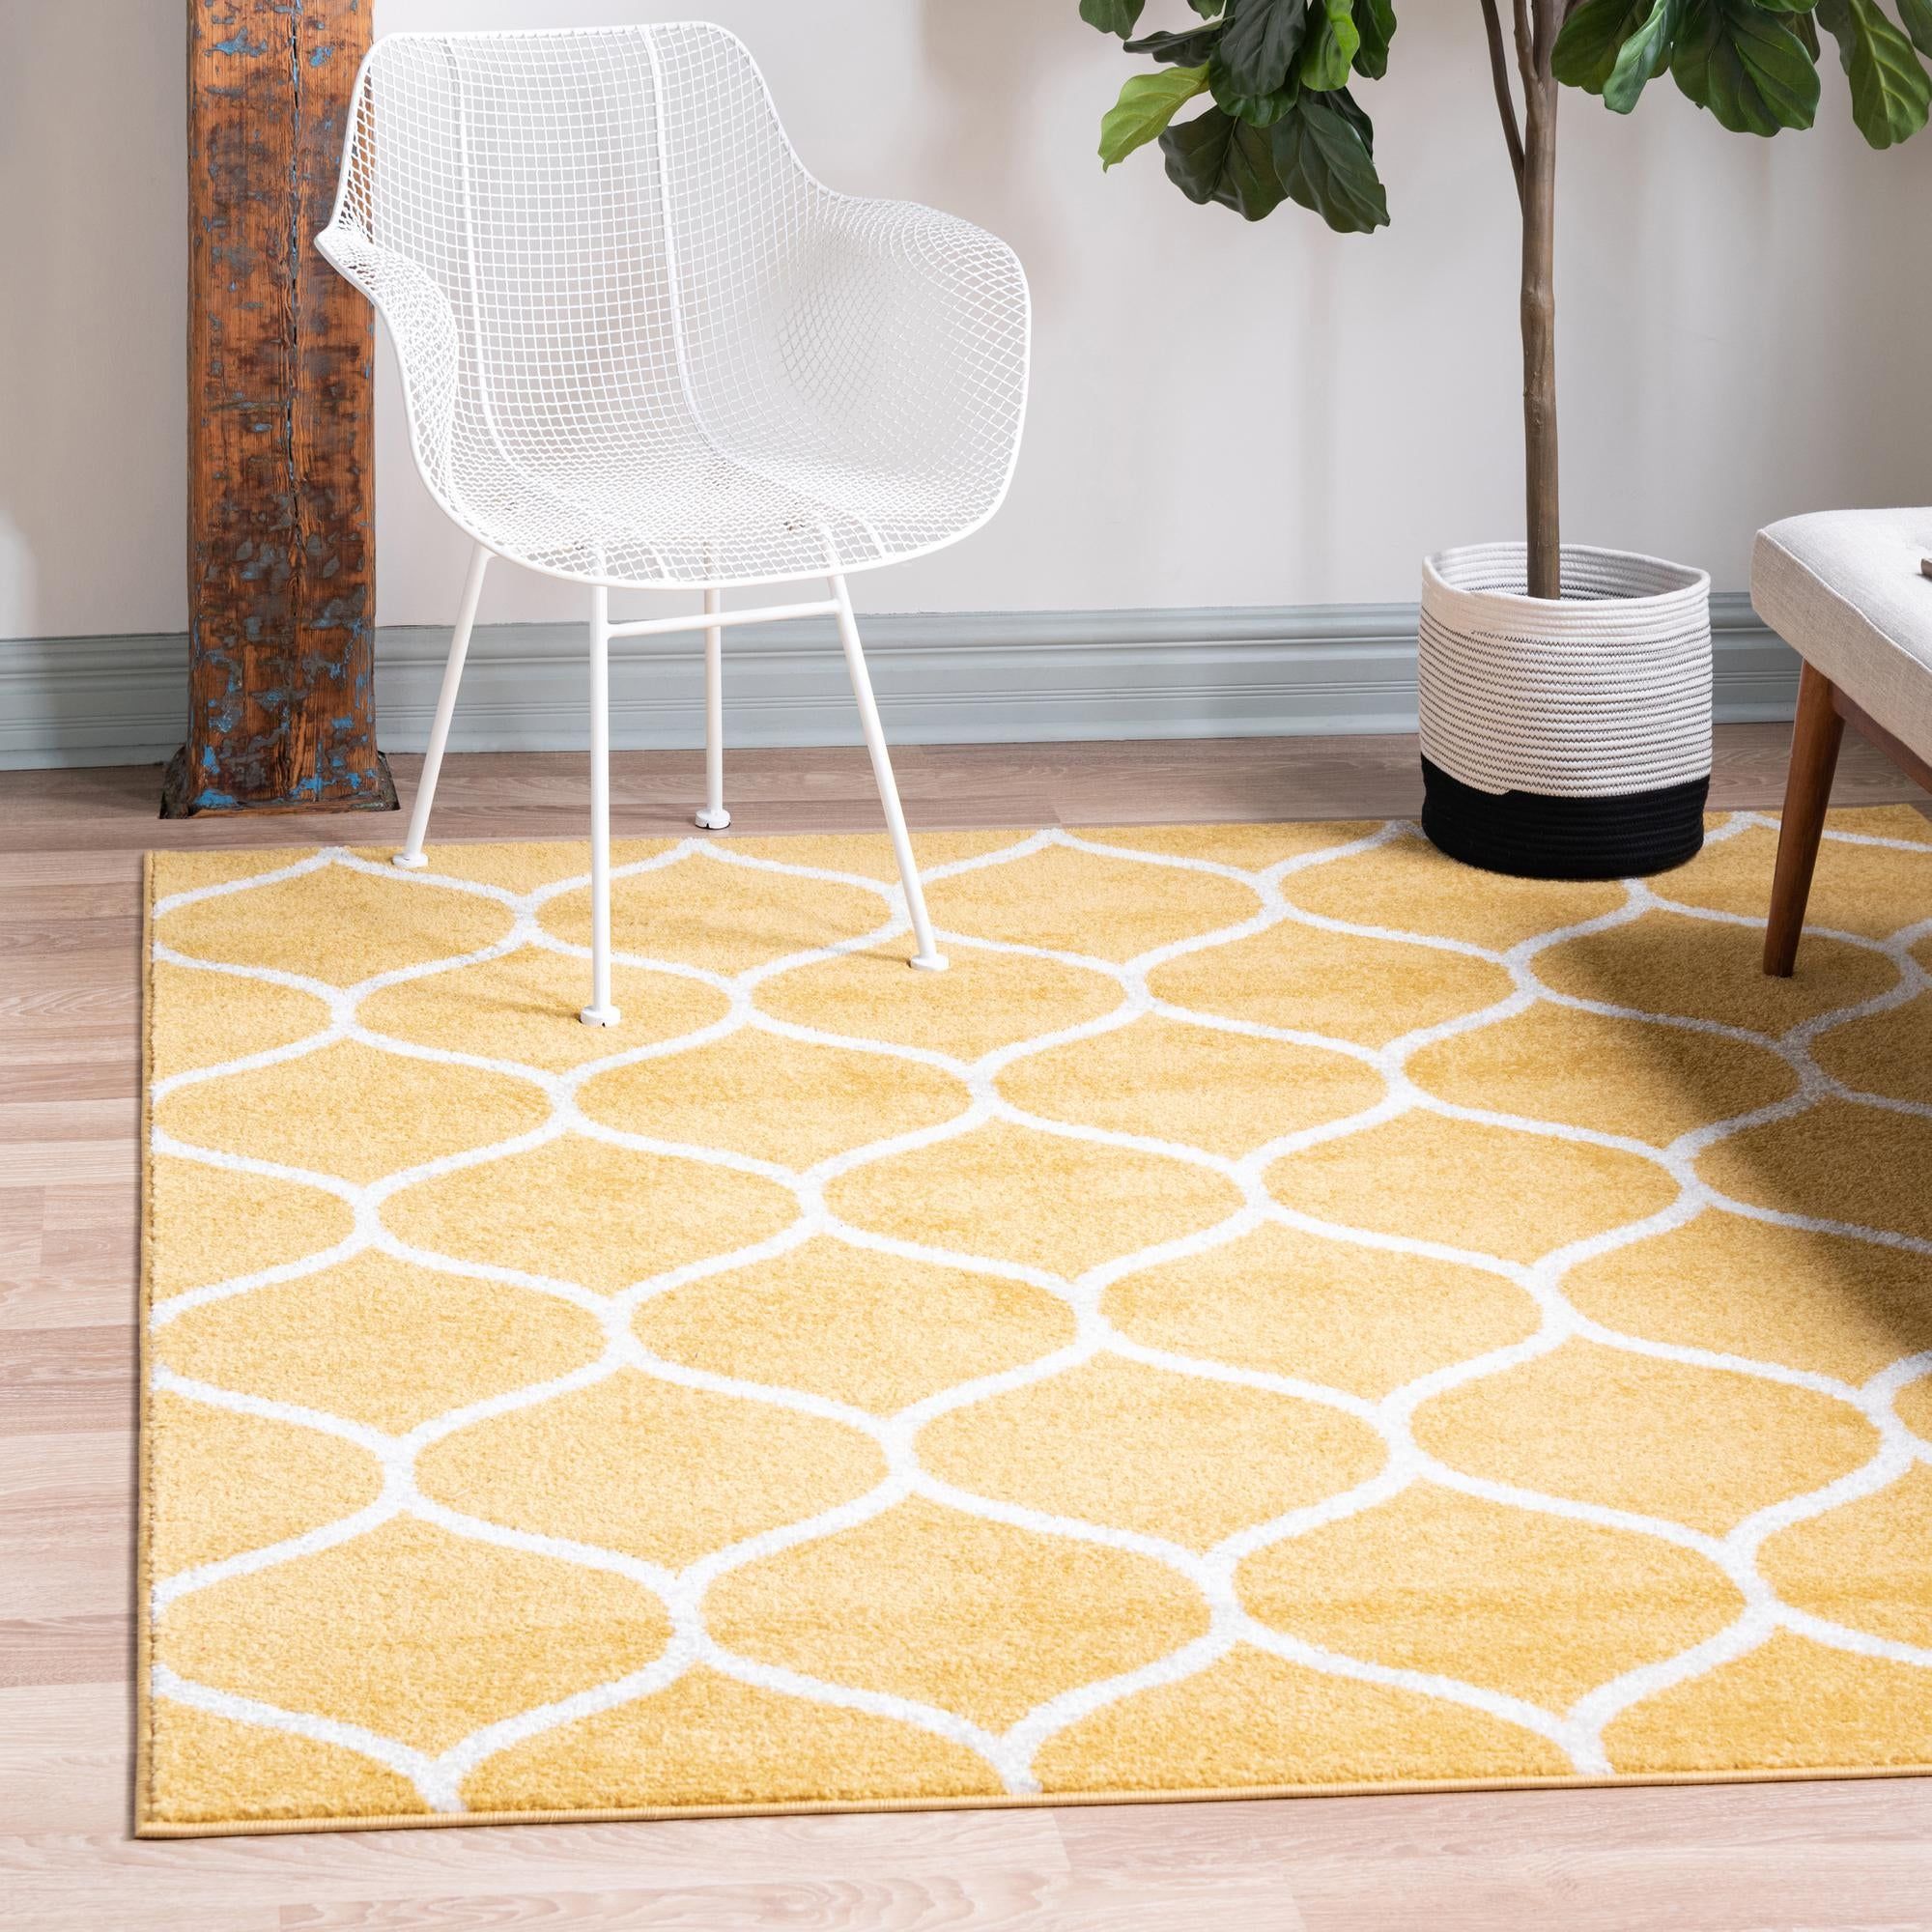 Yellow 240cm X 240cm Trellis Frieze Square Rug | Irugs Ch Within Frieze Square Rugs (View 3 of 15)